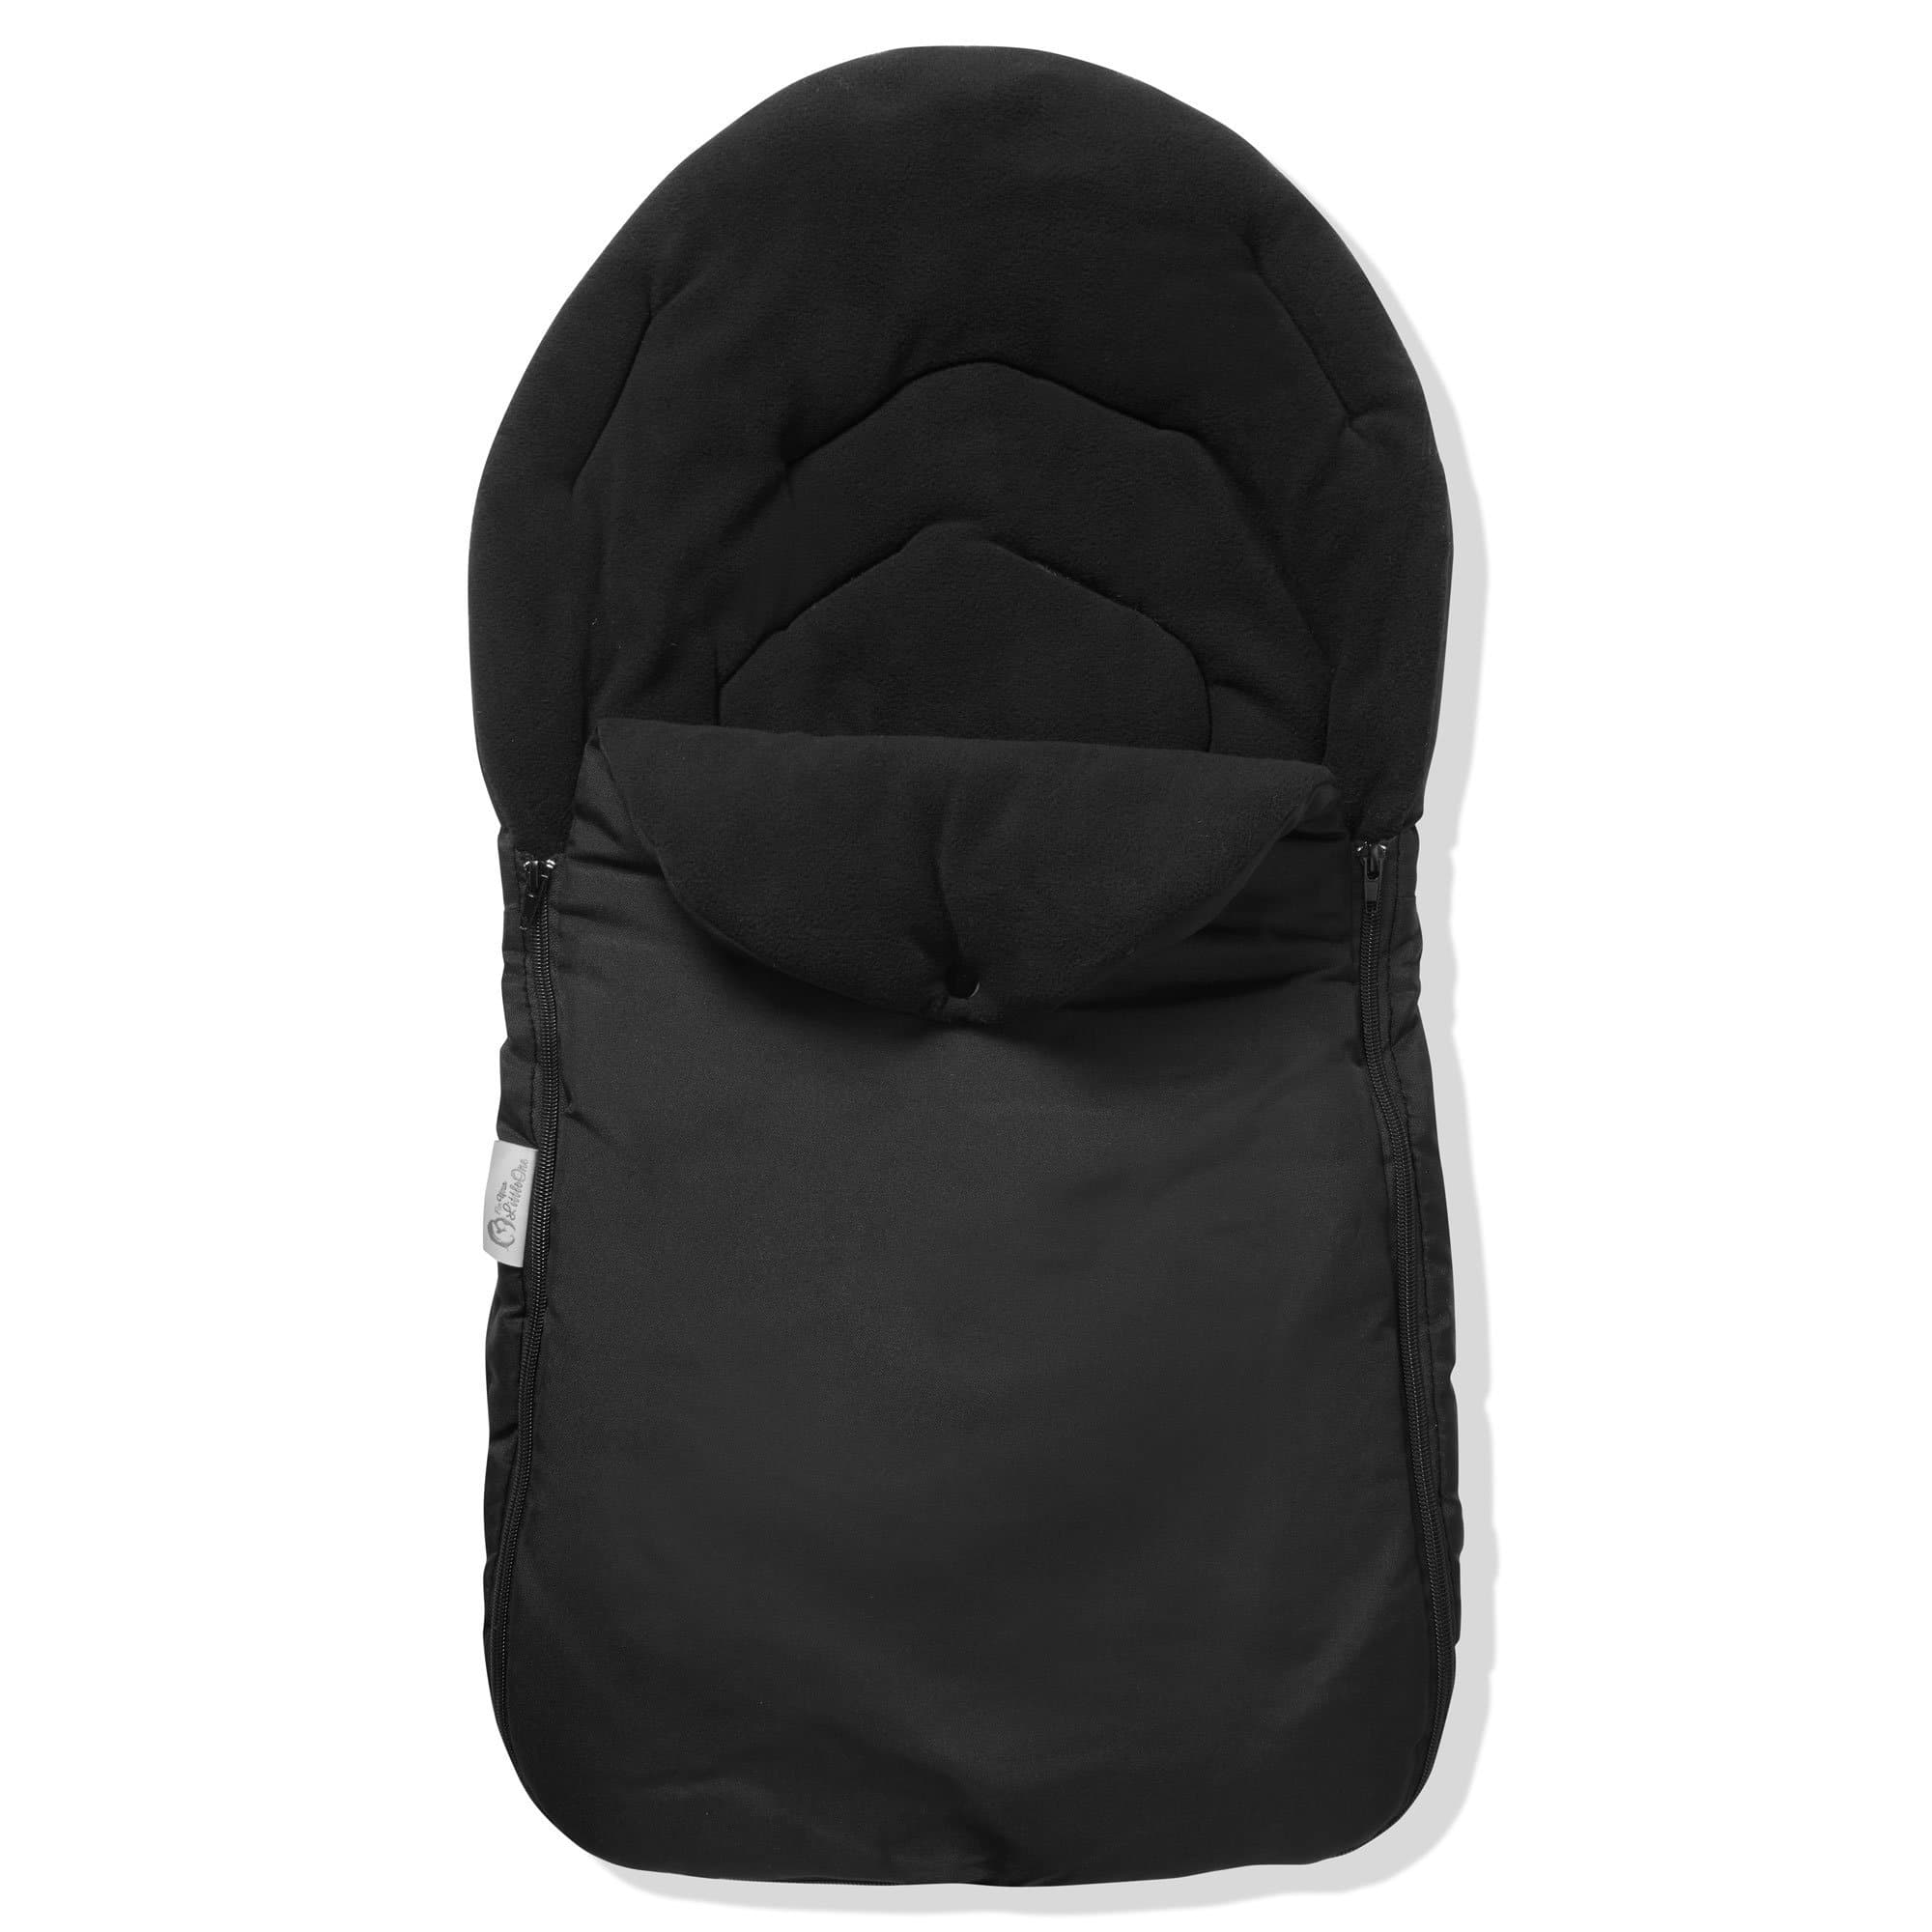 Car Seat Footmuff / Cosy Toes Compatible with My Child - Black / Fits All Models | For Your Little One